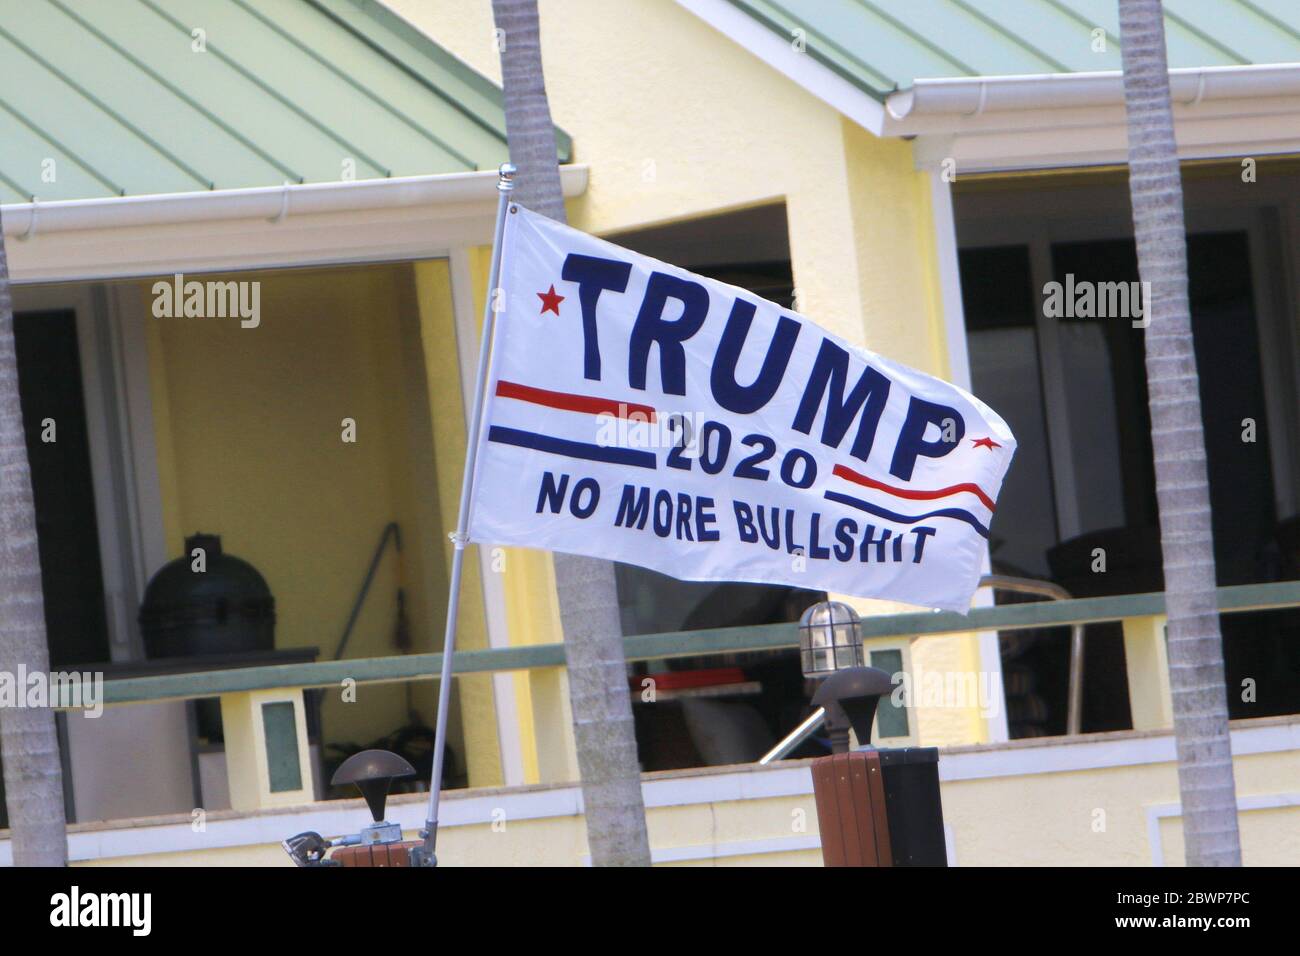 Marco Island, FL, 5/23/2020: 'Trump. No more bullshit' banner is flying on a post at a private residence. Stock Photo